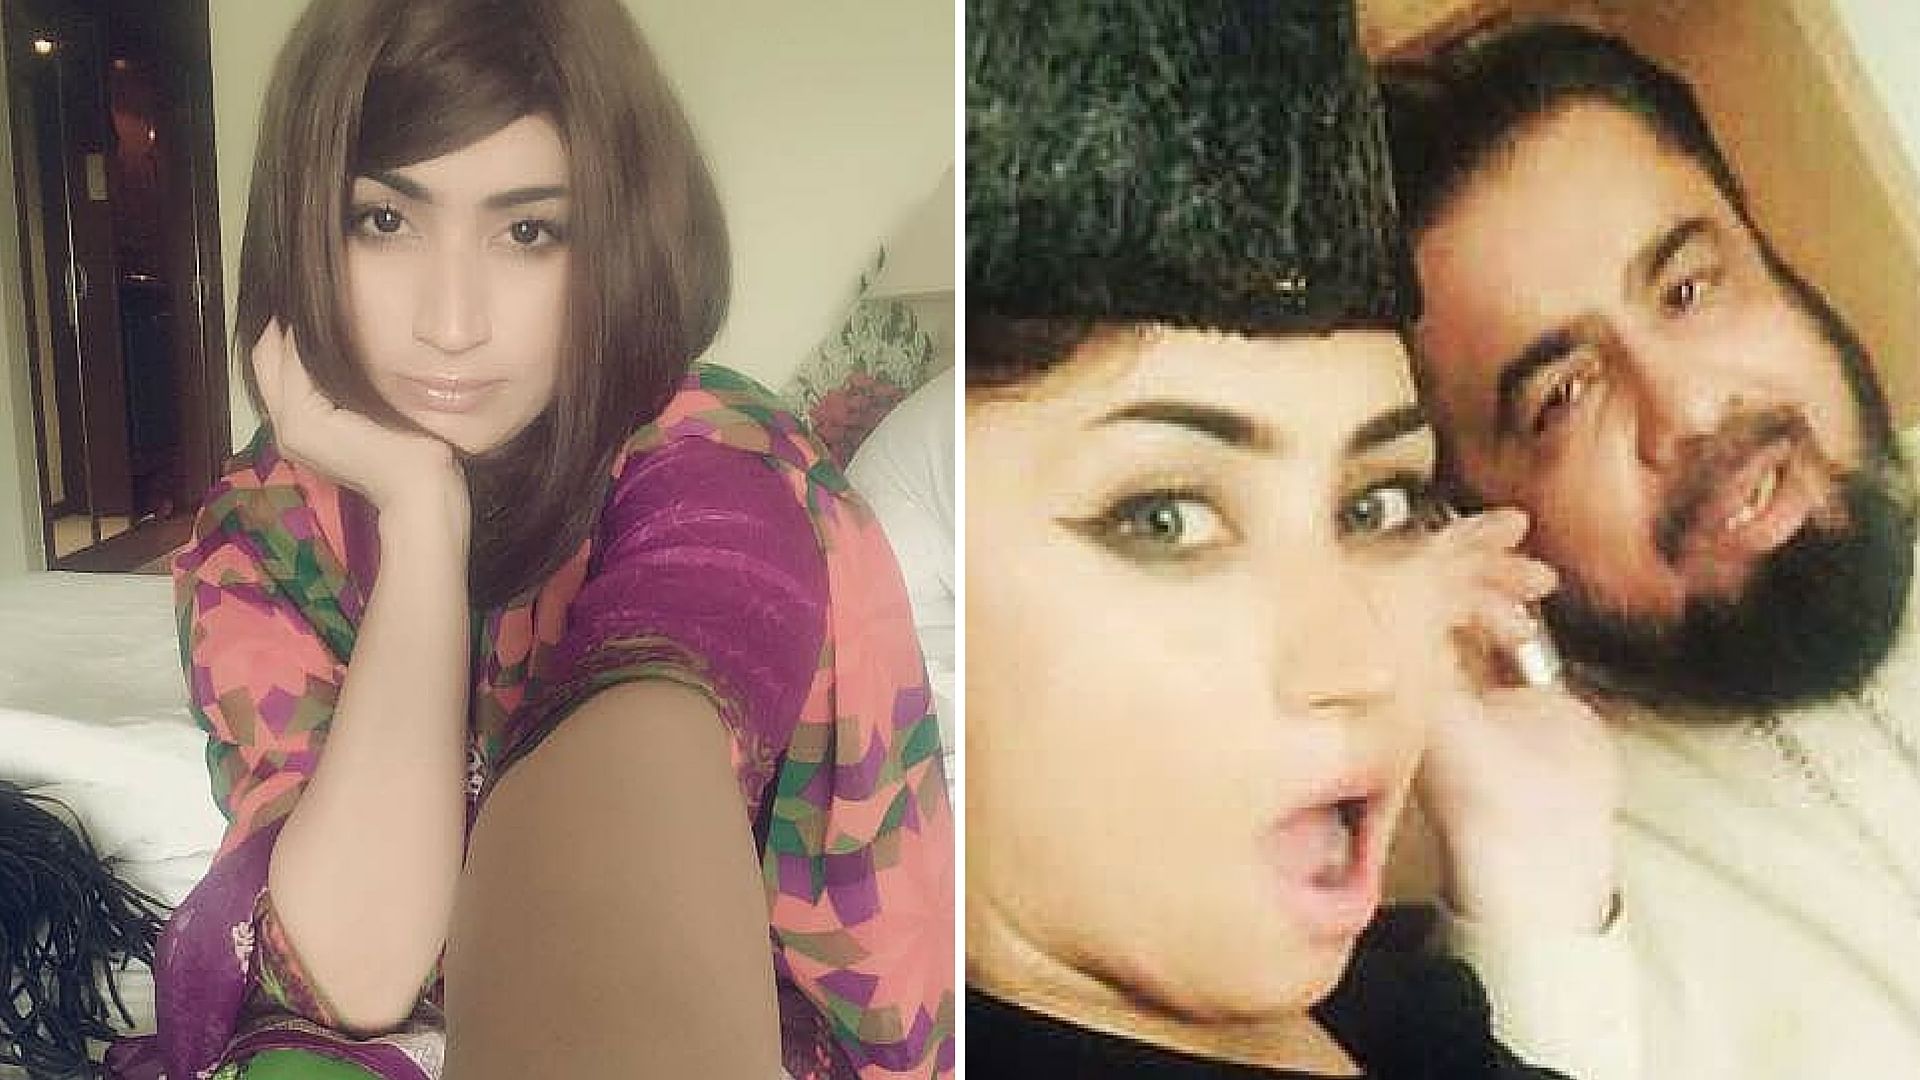 

Qandeel Baloch was in the news when her posts with controversial selfies and videos with Mufti Abdul Qawi went viral. (Photo Courtesy: <a href="https://www.facebook.com/search/photos/?q=qandeel%20cleric">Facebook/QandeelBalochOfficial</a>)